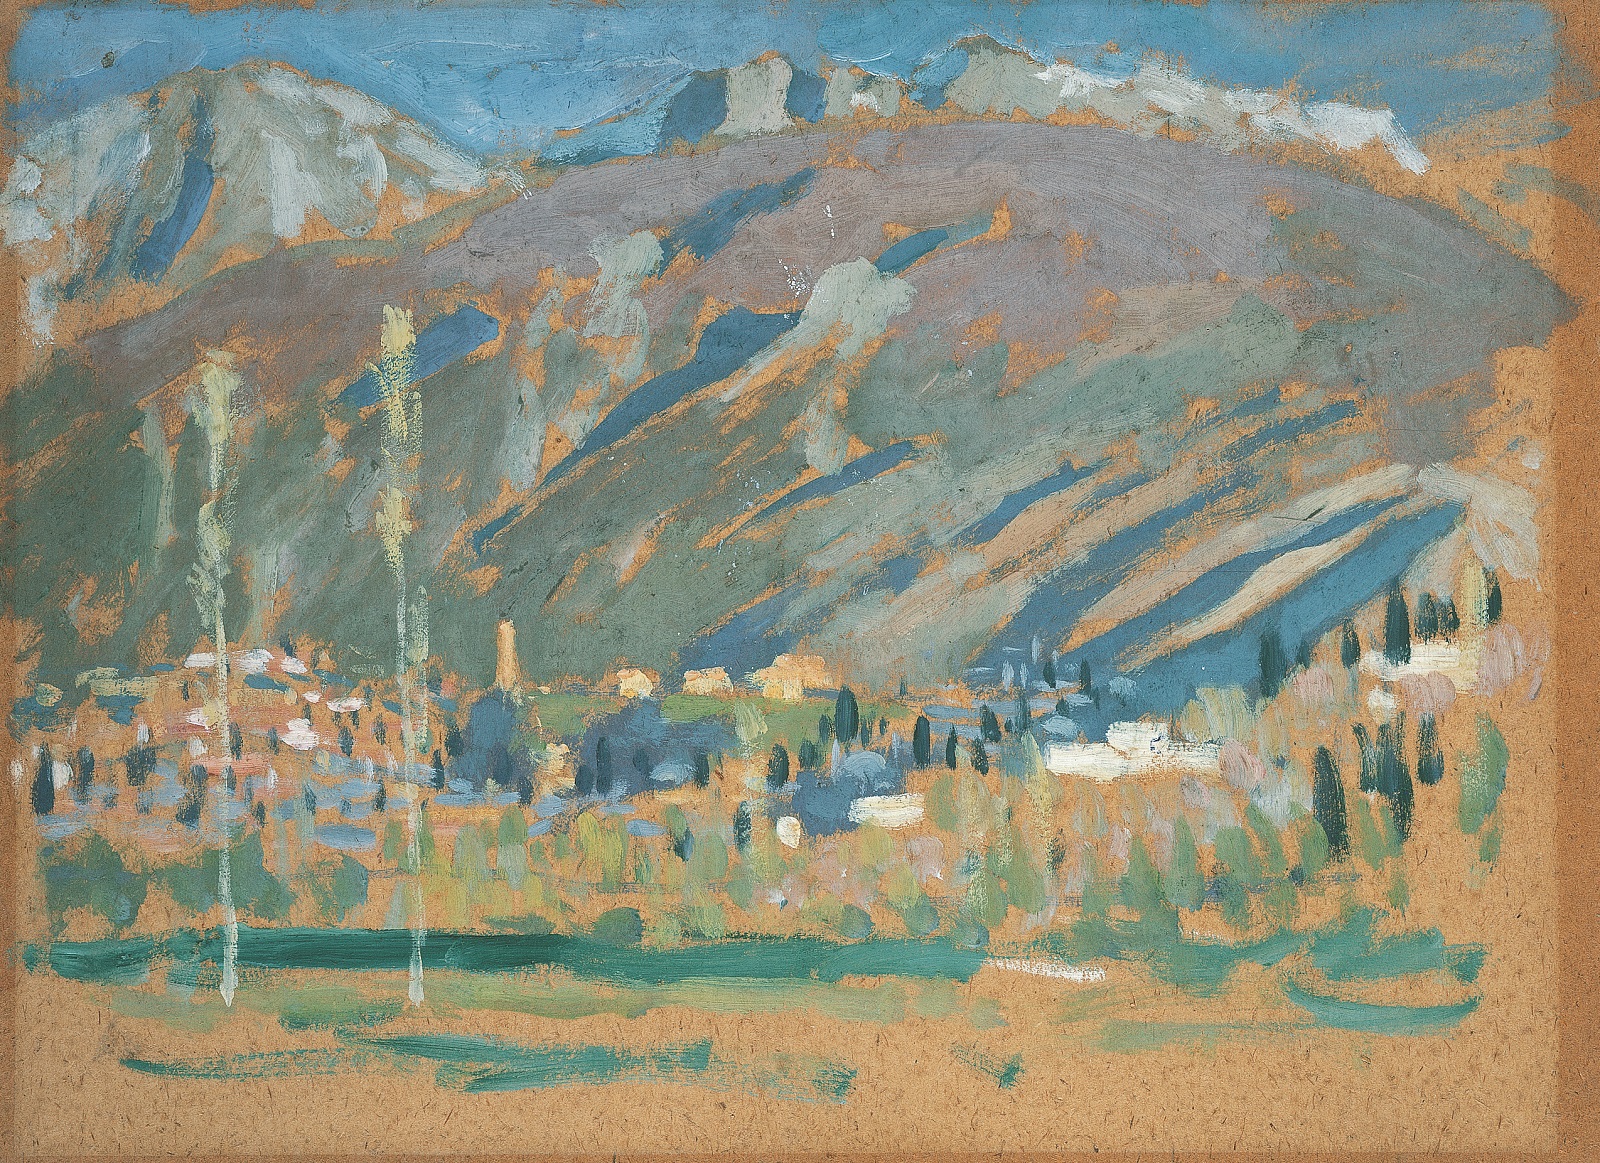 A rough painting depicting a a mountainous landscape with bare patches where the tan coloured paper underneath can be seen.